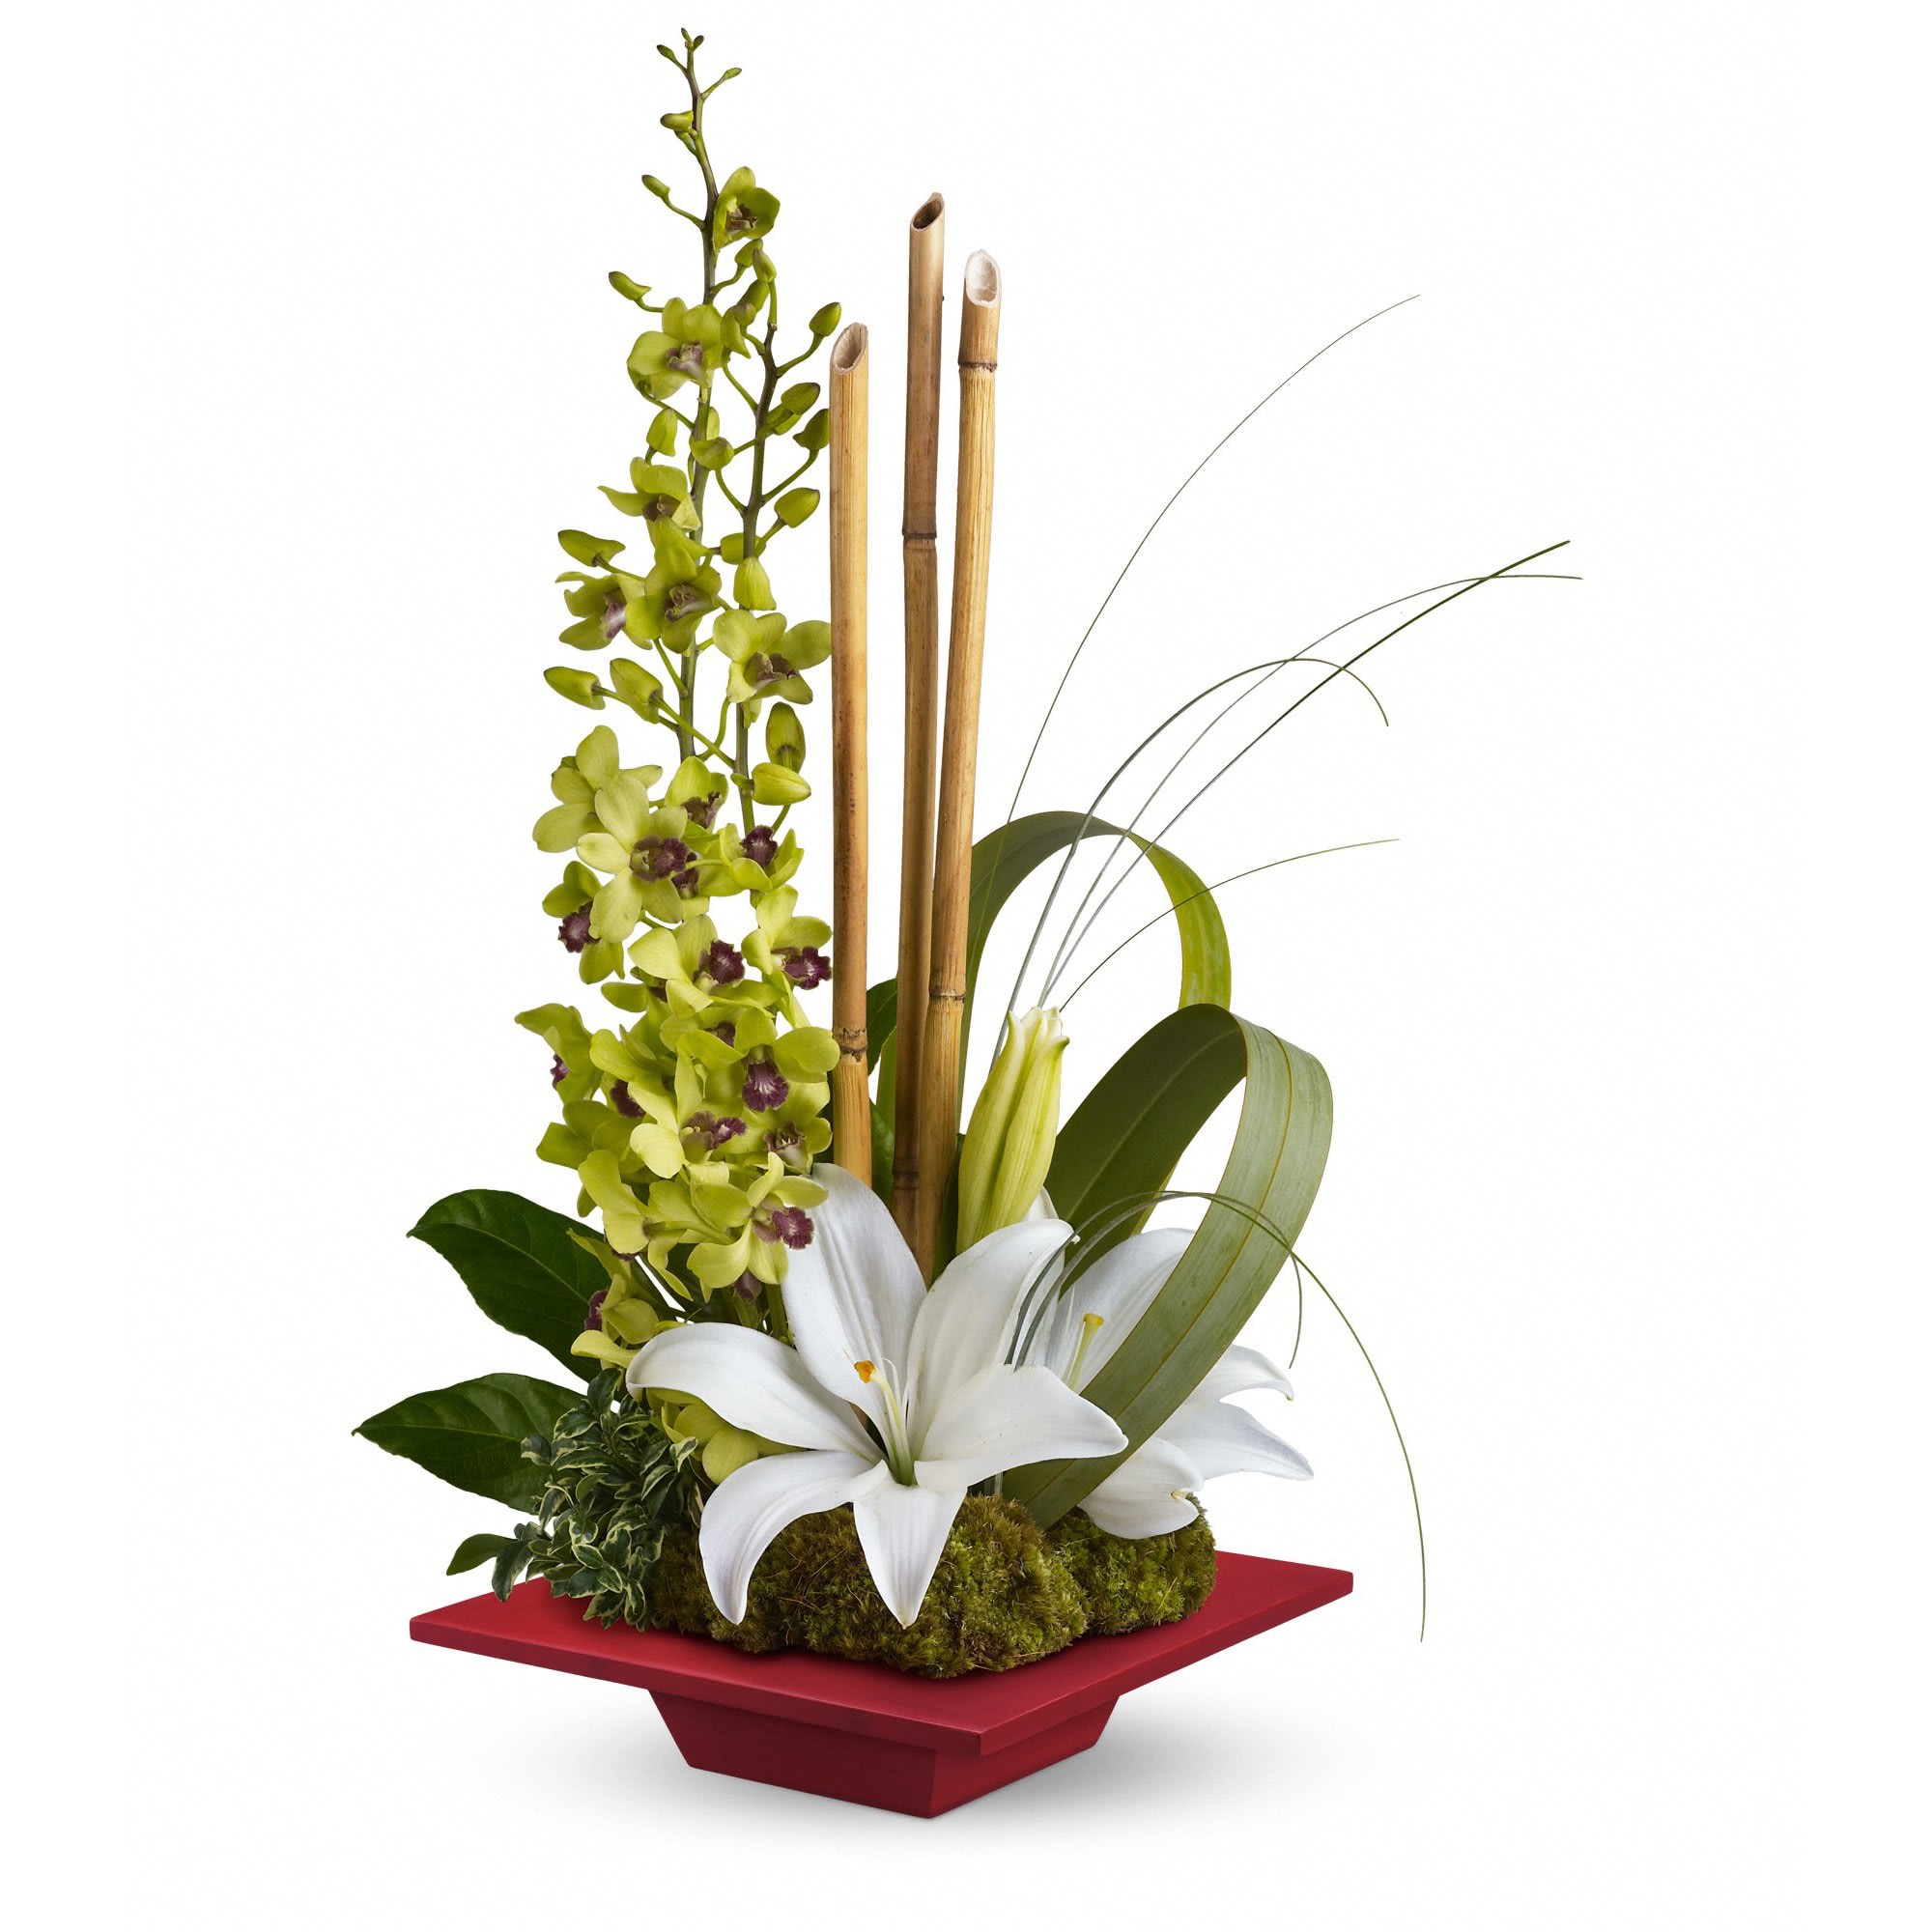 Teleflora's Secret Oasis - This lovely, serene bouquet makes a Zen-sational gift for any special occasion. They'll be thrilled with this artistic arrangement of orchids, lilies and exotic accents in a red bamboo dish. It's like a trip to Shangri-La.  